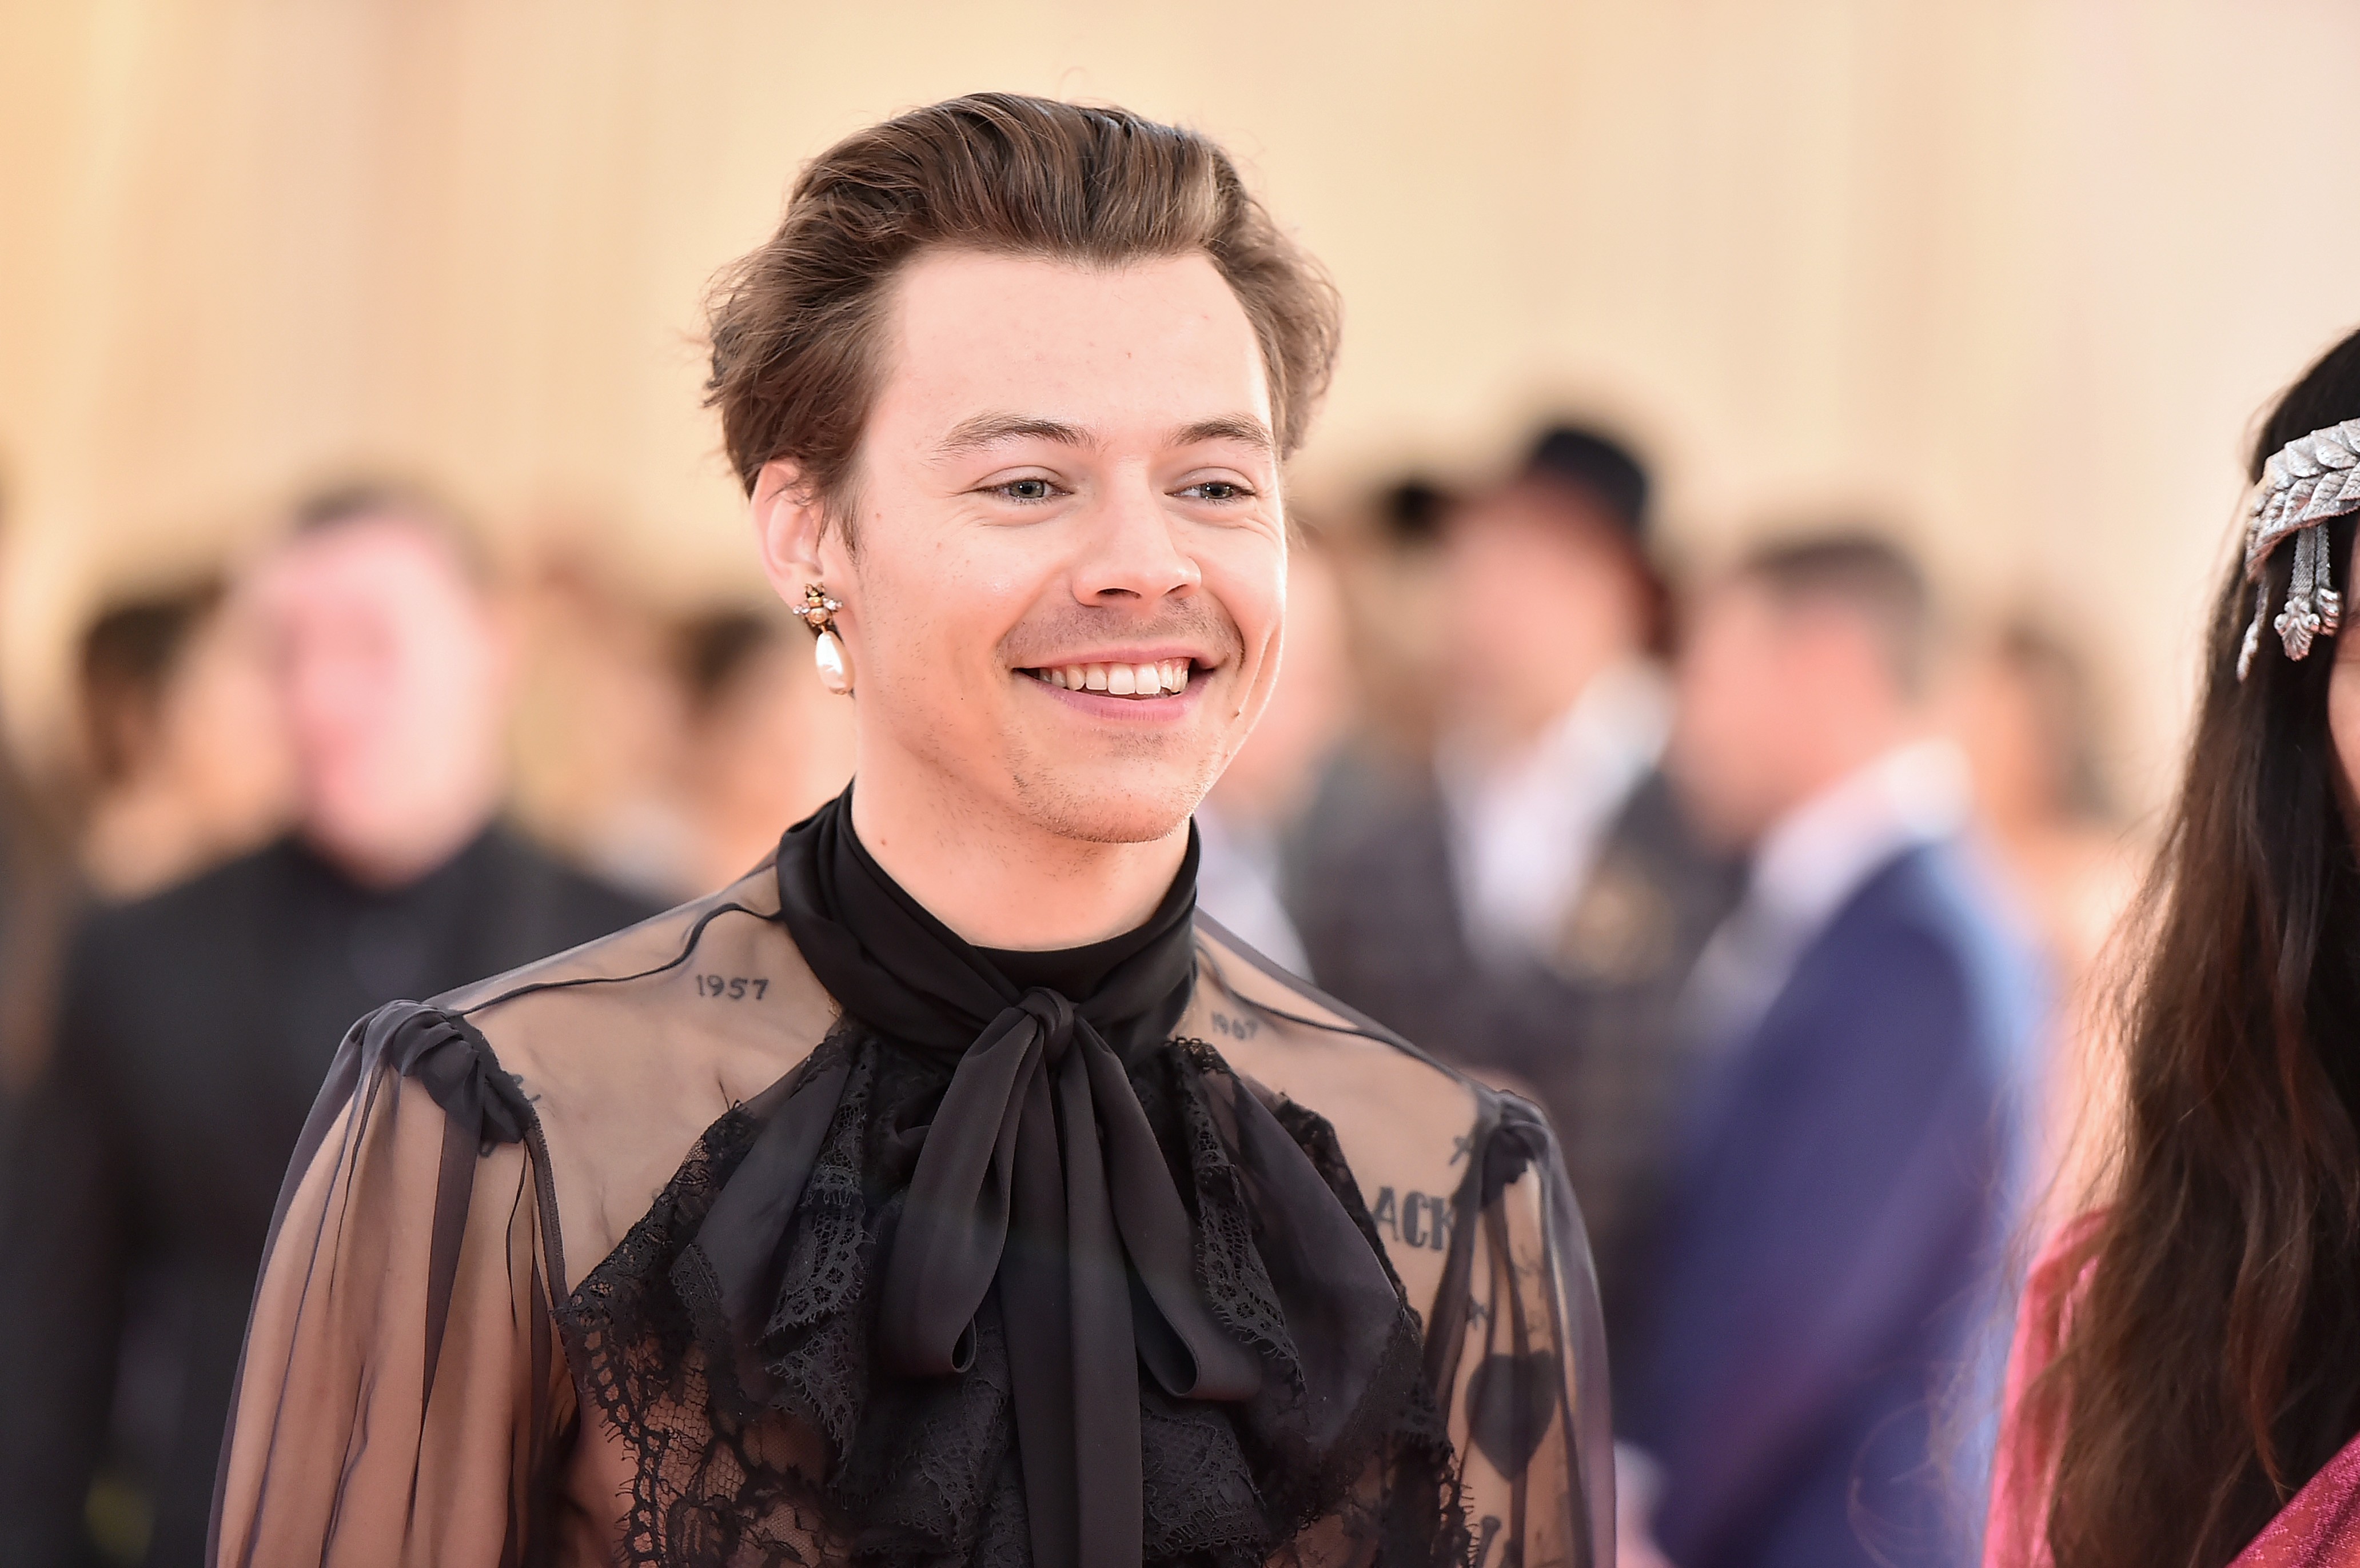 Harry Styles rocks a pearl drop earring at the 2019 Met Gala in New York. Photo: WireImage